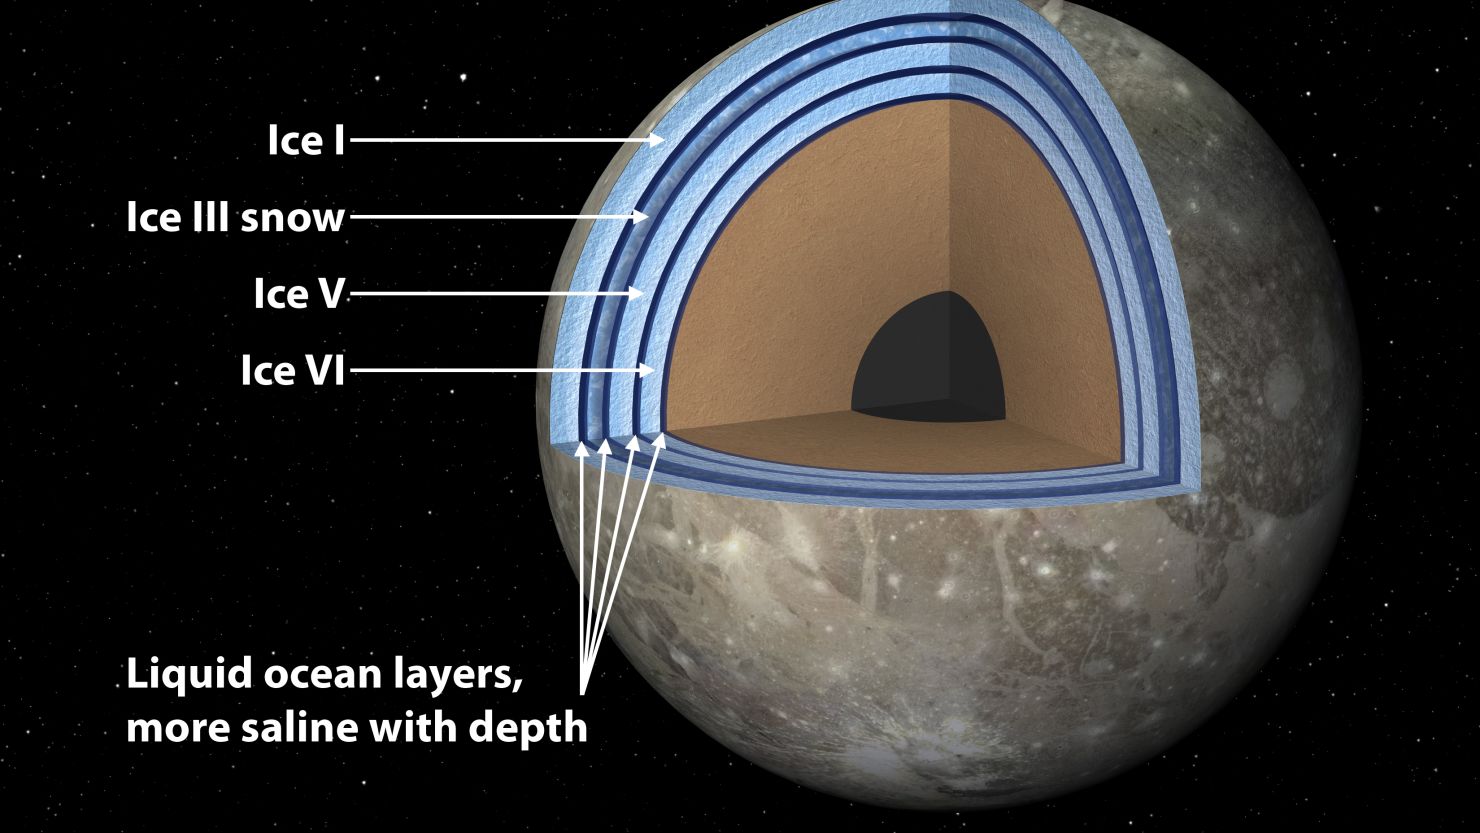 Ganymede, the largest moon in the solar system, may have interior oceans between ice layers. 